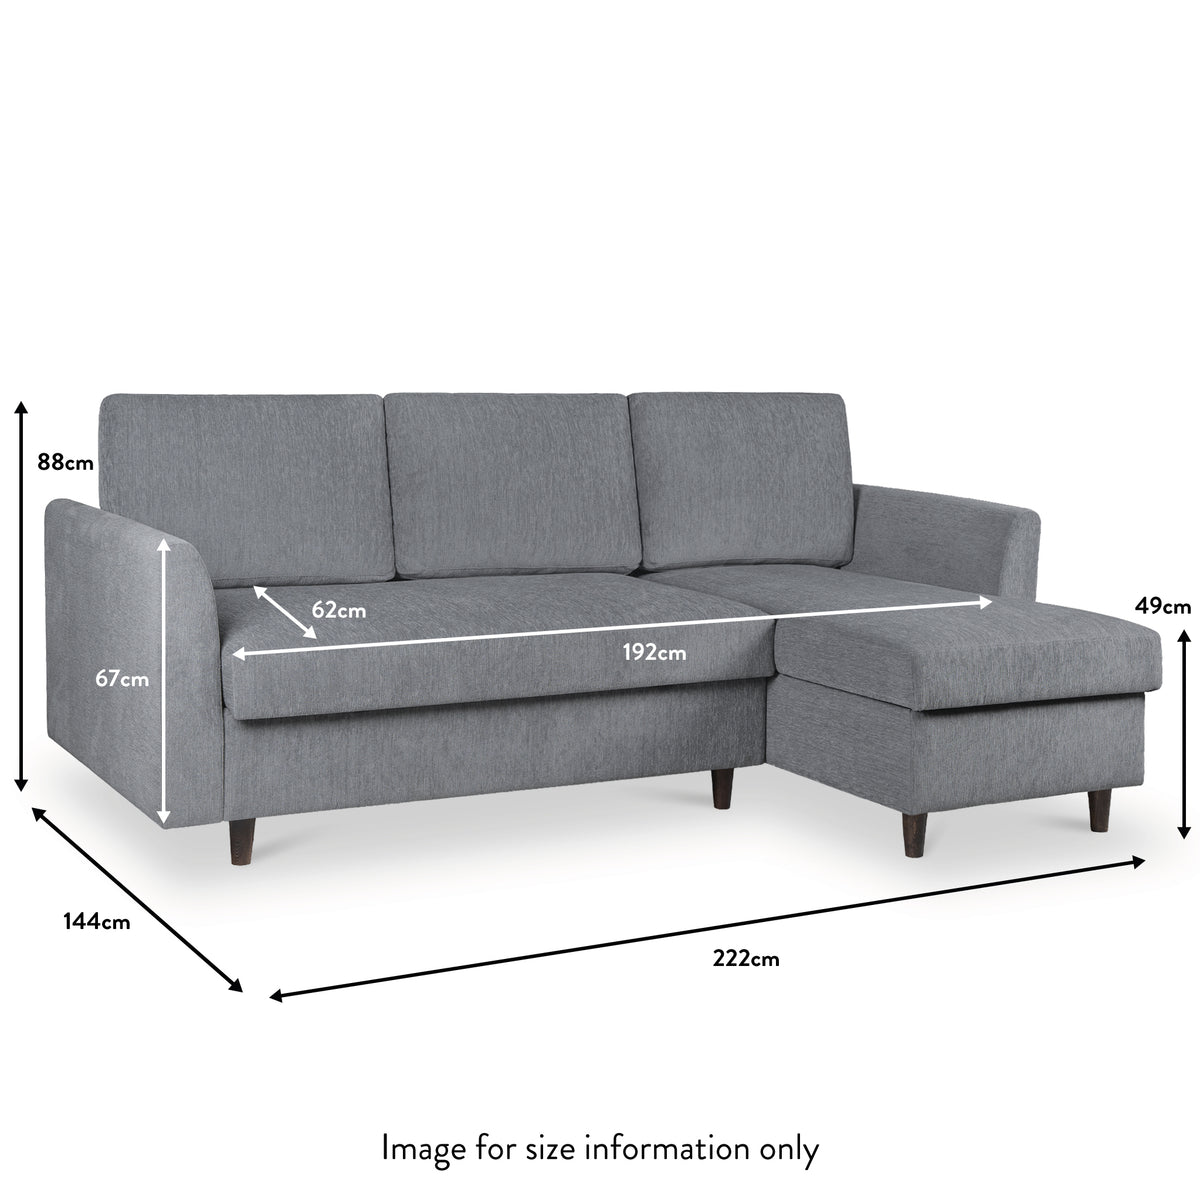 Millen Grey Chaise Sofa Bed dimensions